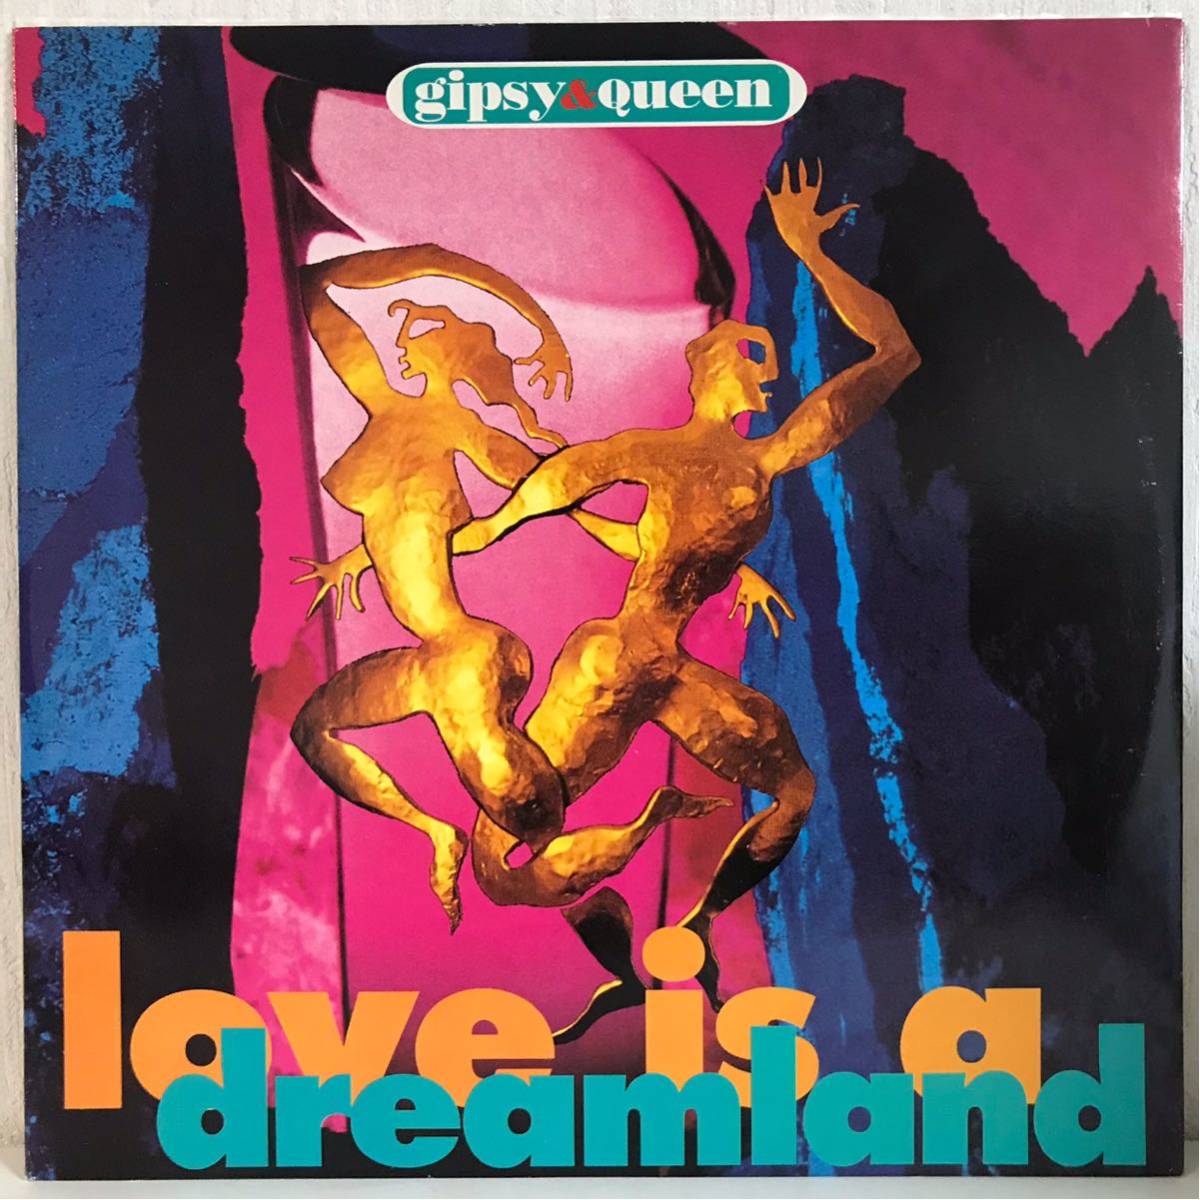 【12inch】GIPSY & QUEEN - LOVE IS A DREAMLAND / ユーロビート / ハイエナジーの画像1